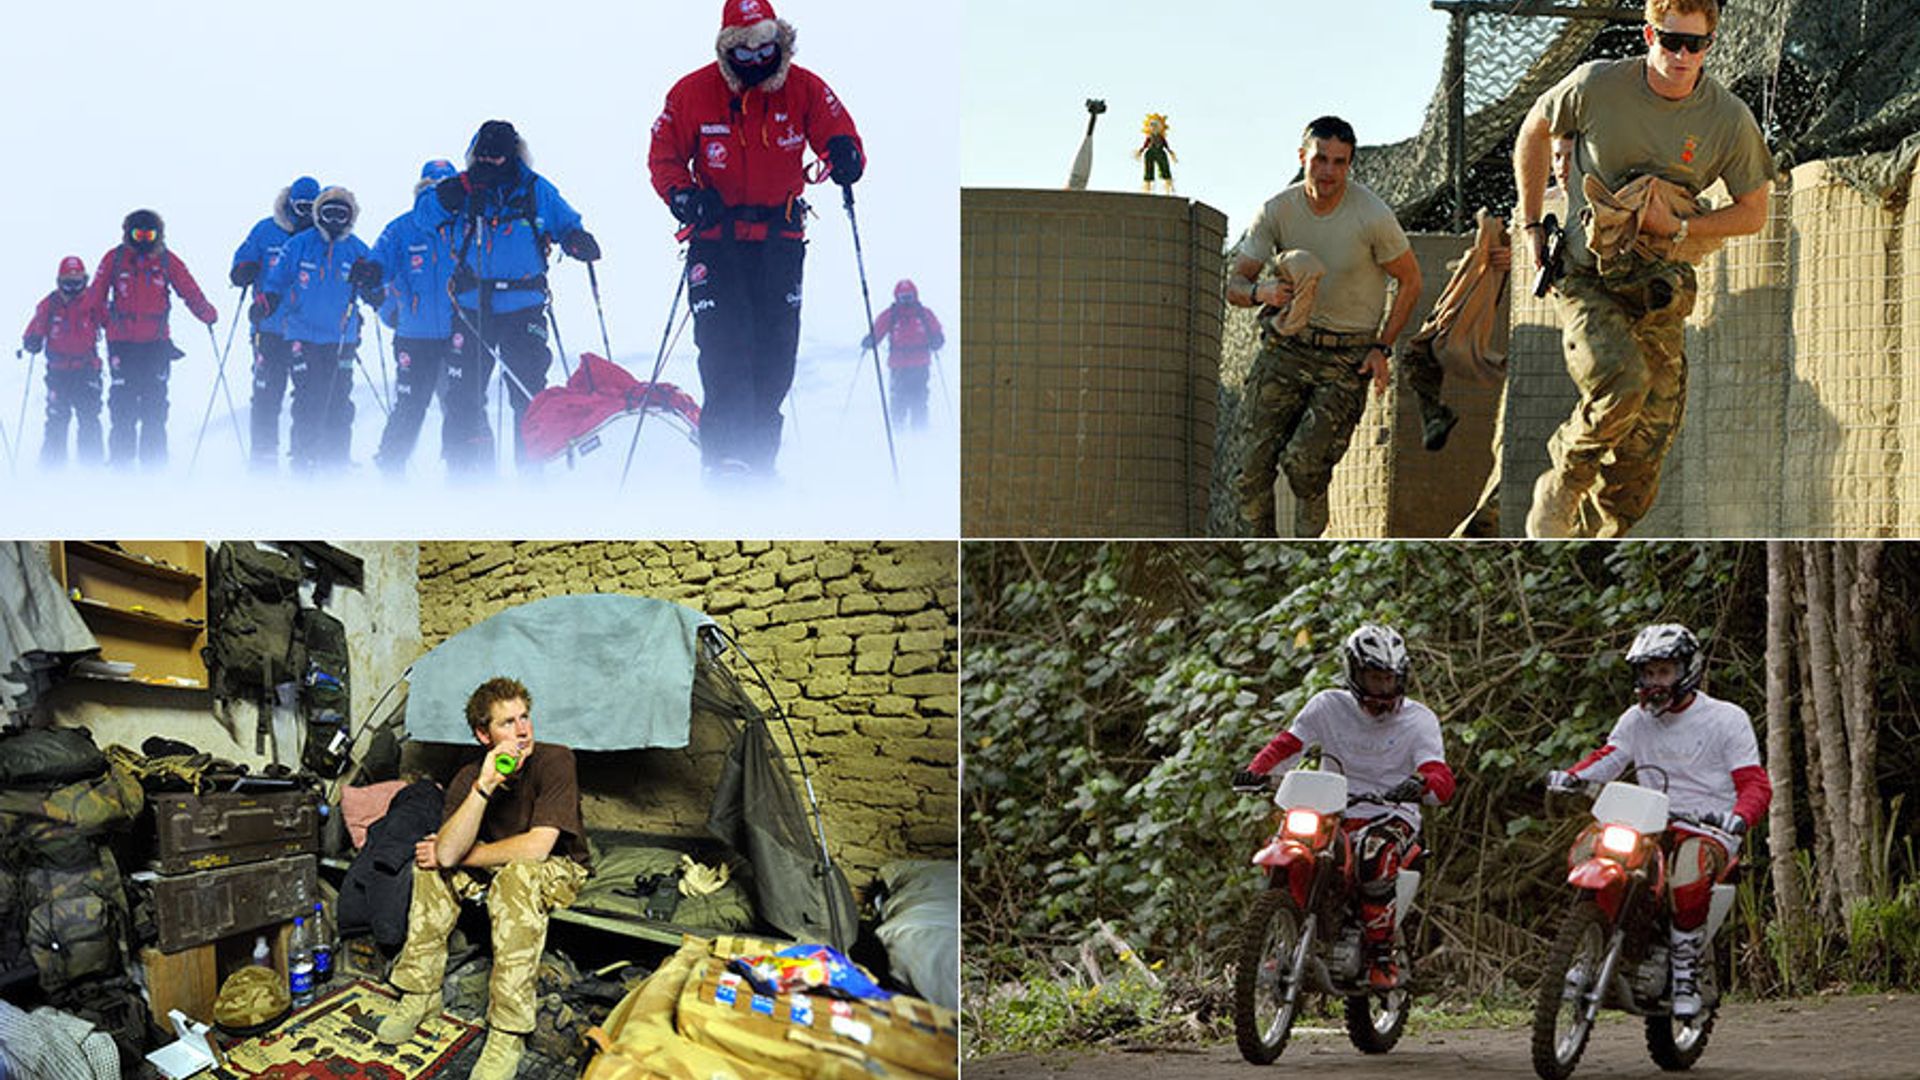 Action man Prince Harry! The British royal's most adventurous moments